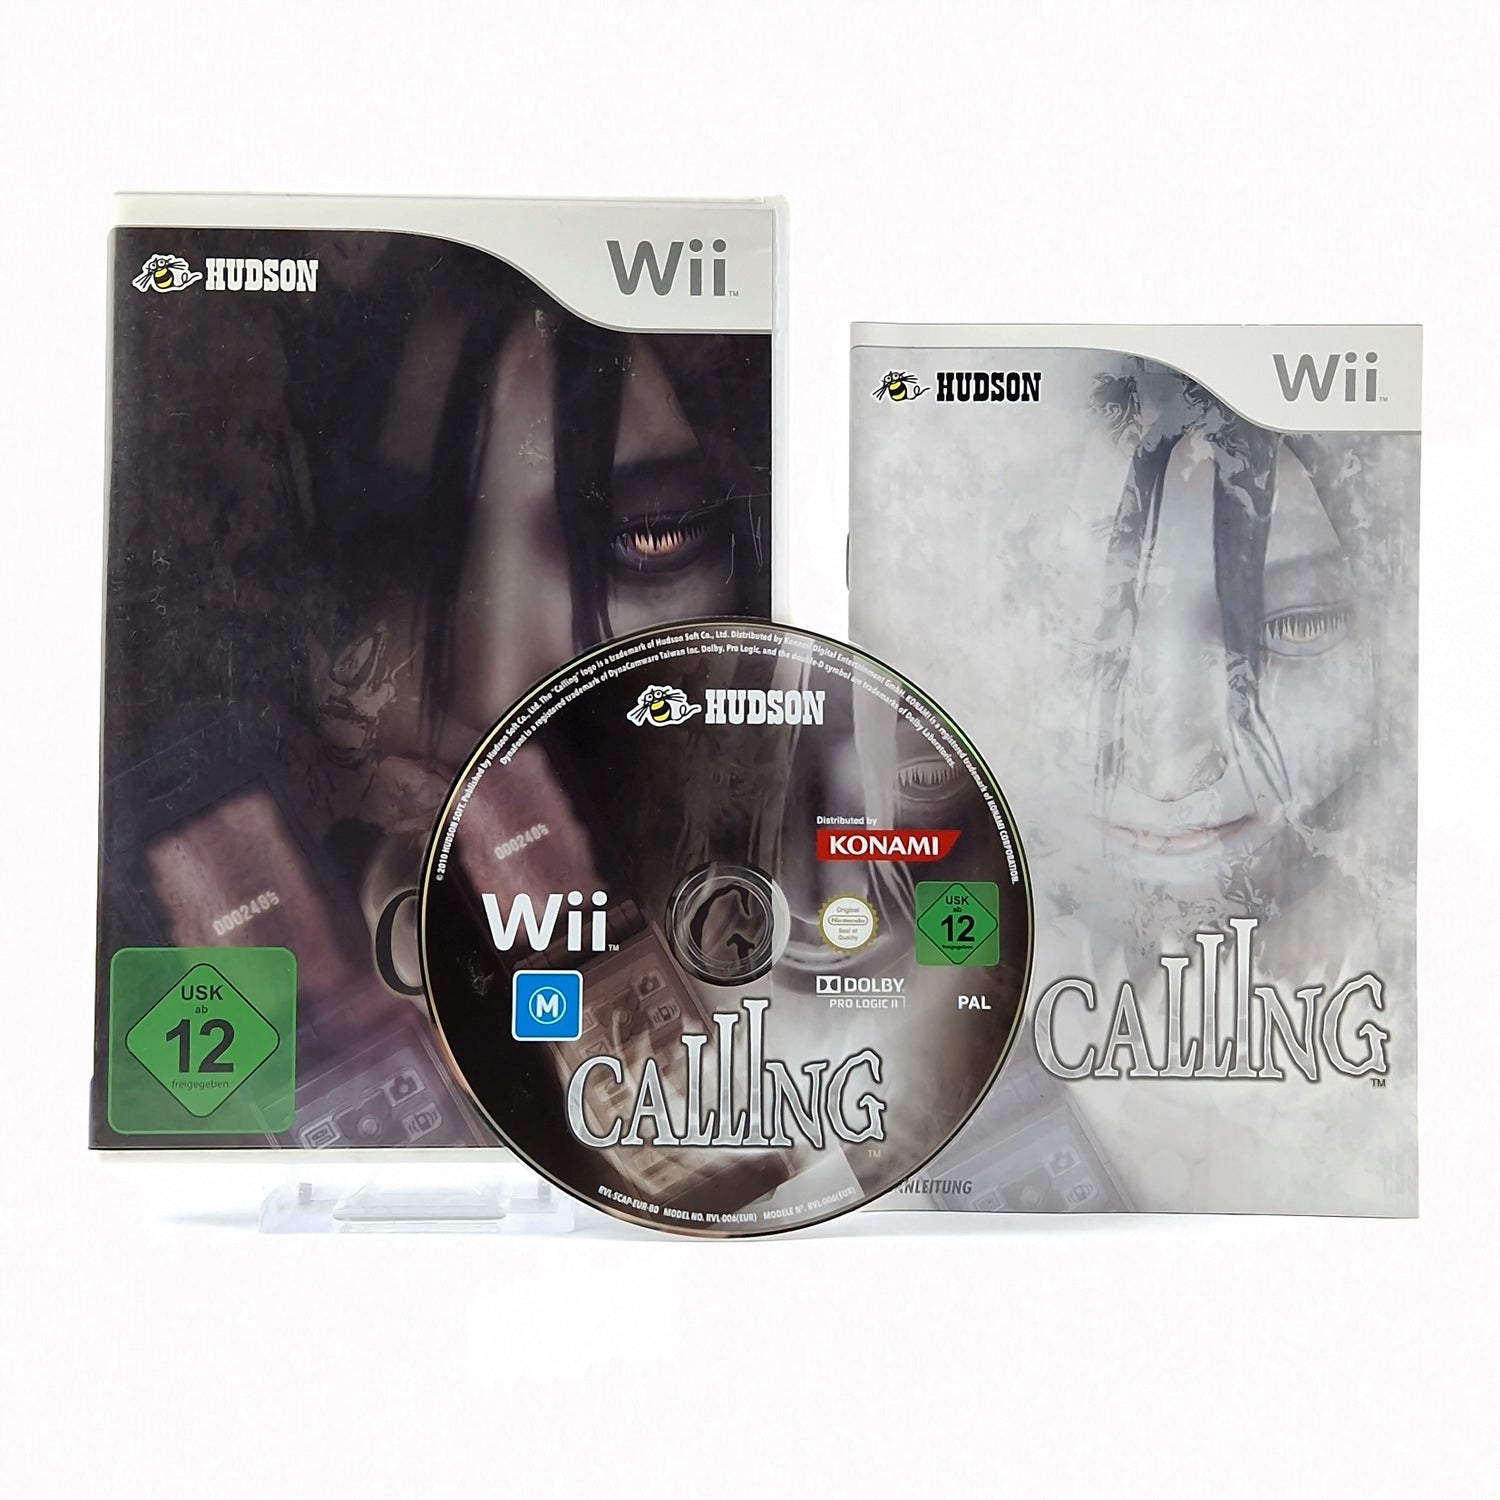 Nintendo Wii Game: Calling by Hudson - OVP Instructions CD Pal Disk